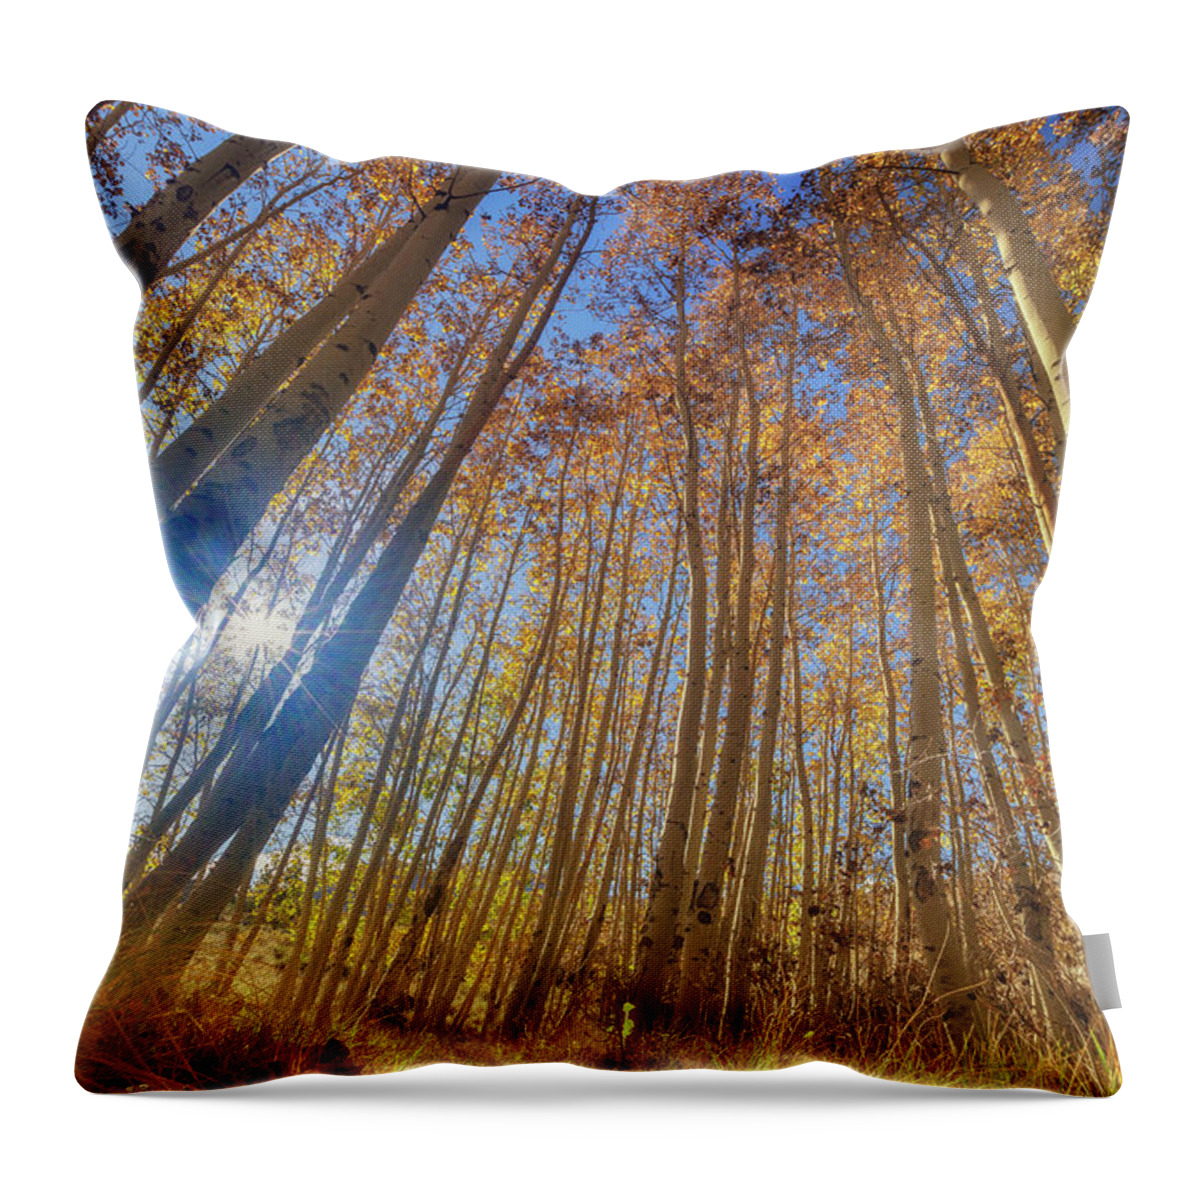 Fall Colors Throw Pillow featuring the photograph Autumn Giants by Tassanee Angiolillo